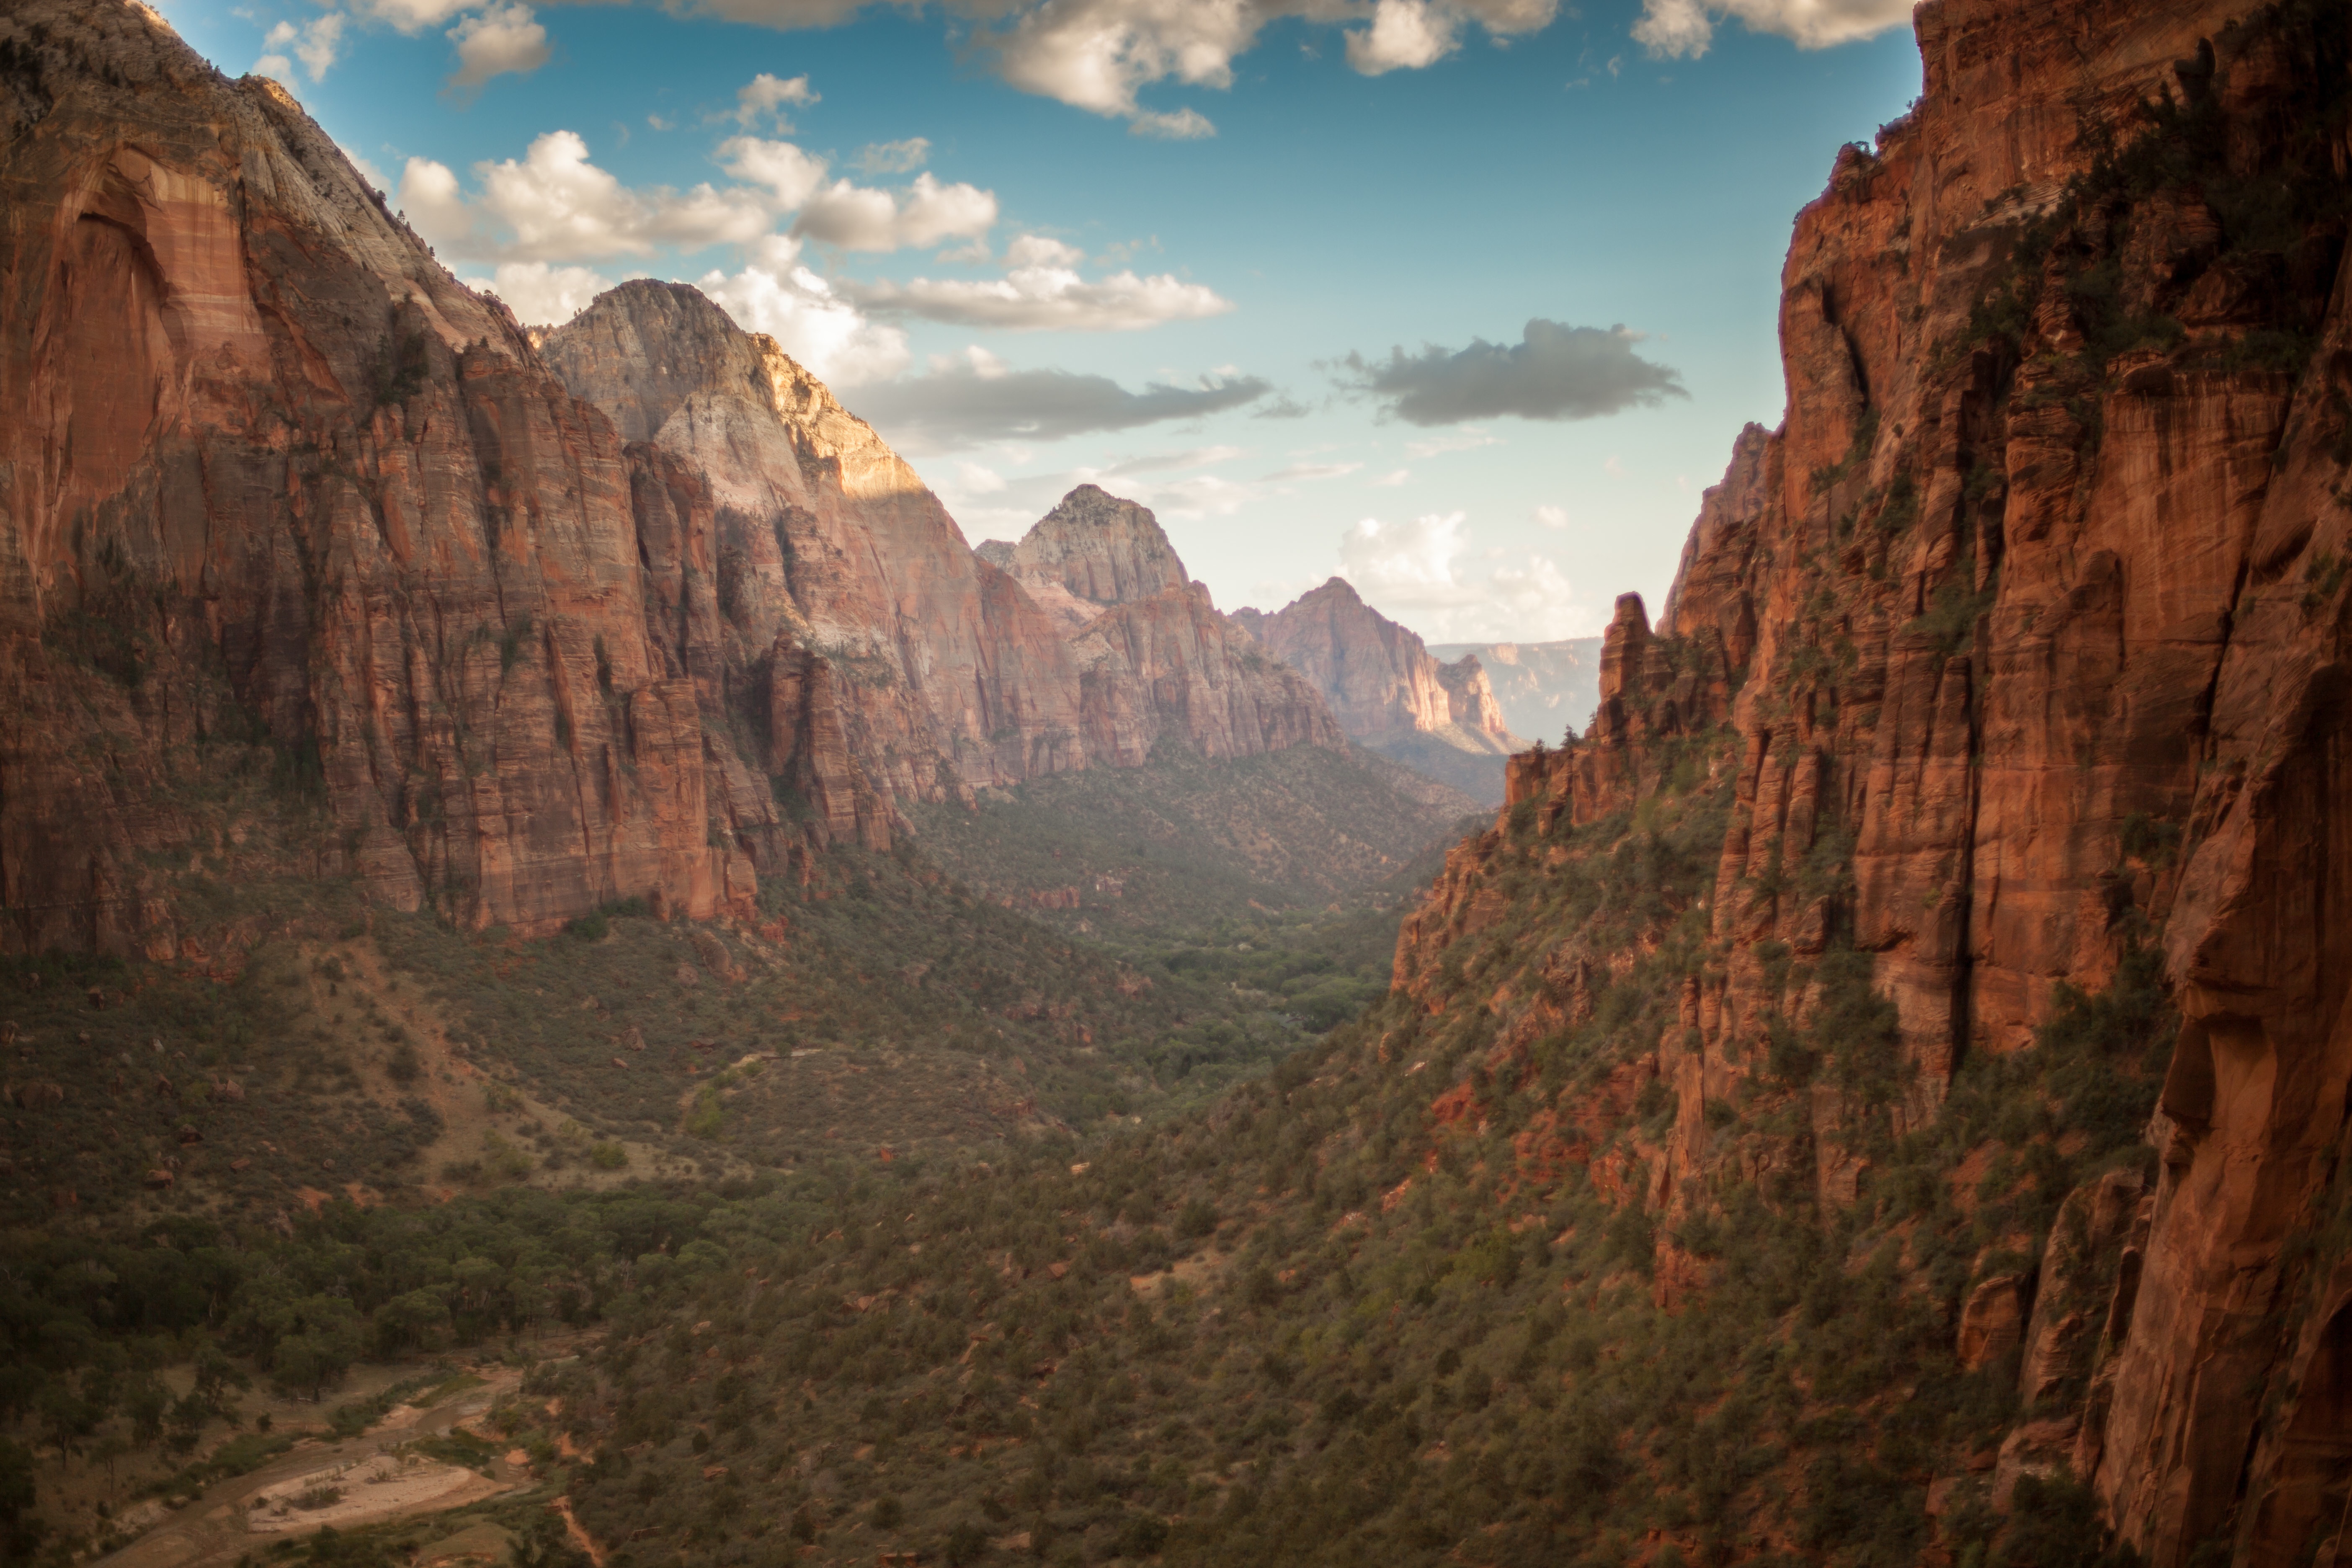 Hazy Zion canyon at sunset. The sky is deep turquoise and the canyon walls are scattered with juniper. They are a deep russet.